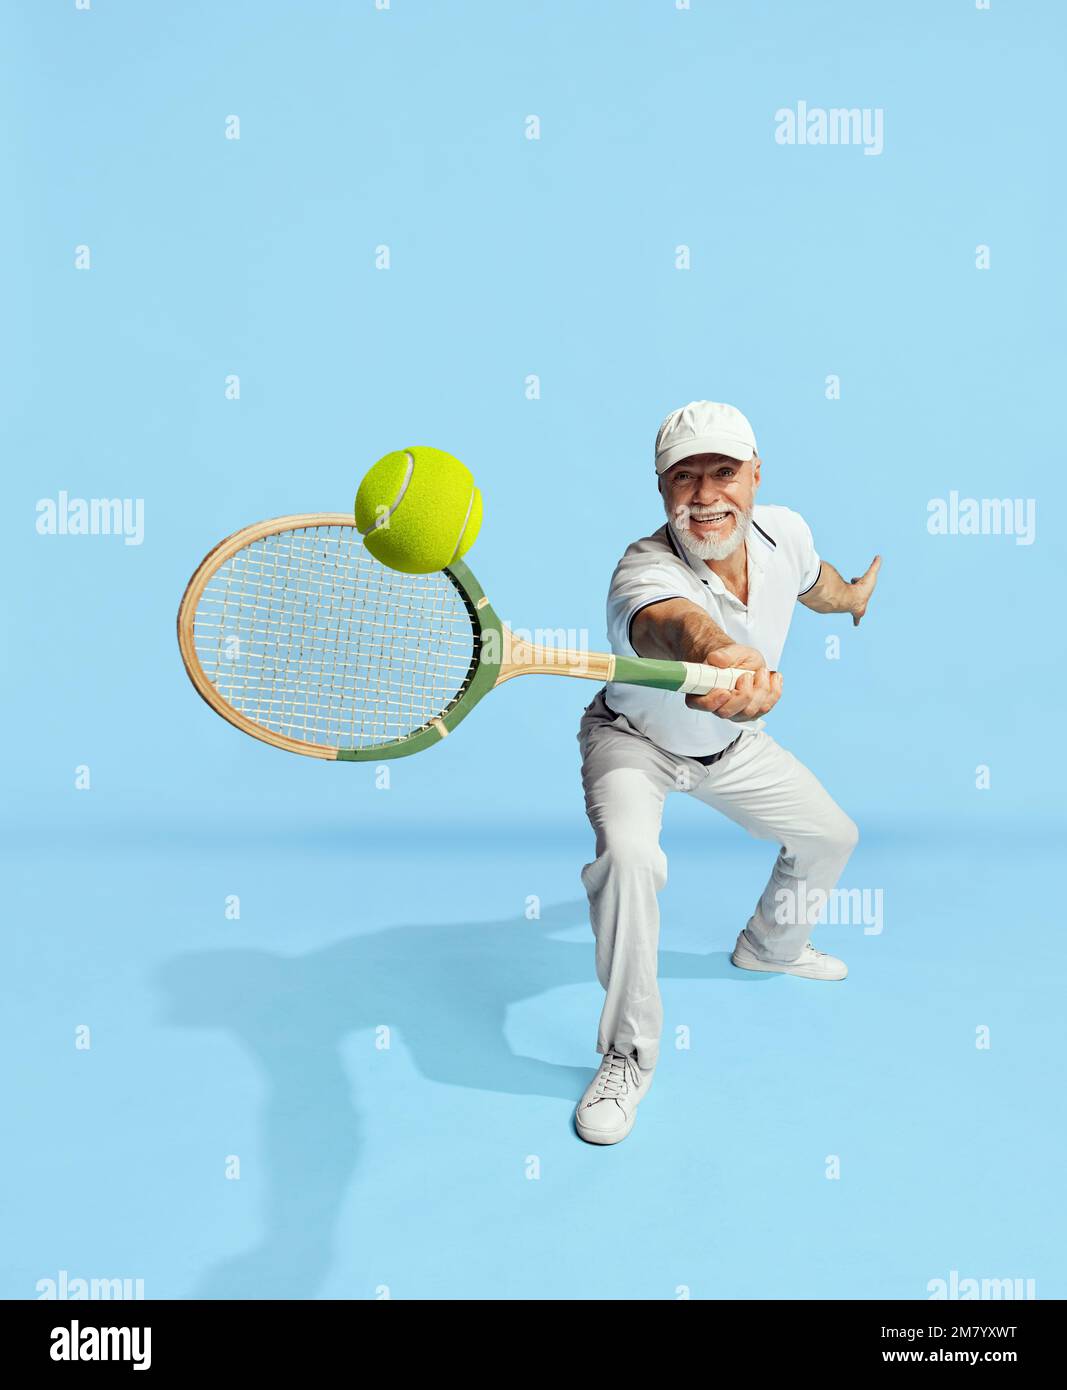 Serving ball. Portrait of handsome senior man in stylish white outfit playing tennis over blue background. Concept of leisure activity, hobby Stock Photo